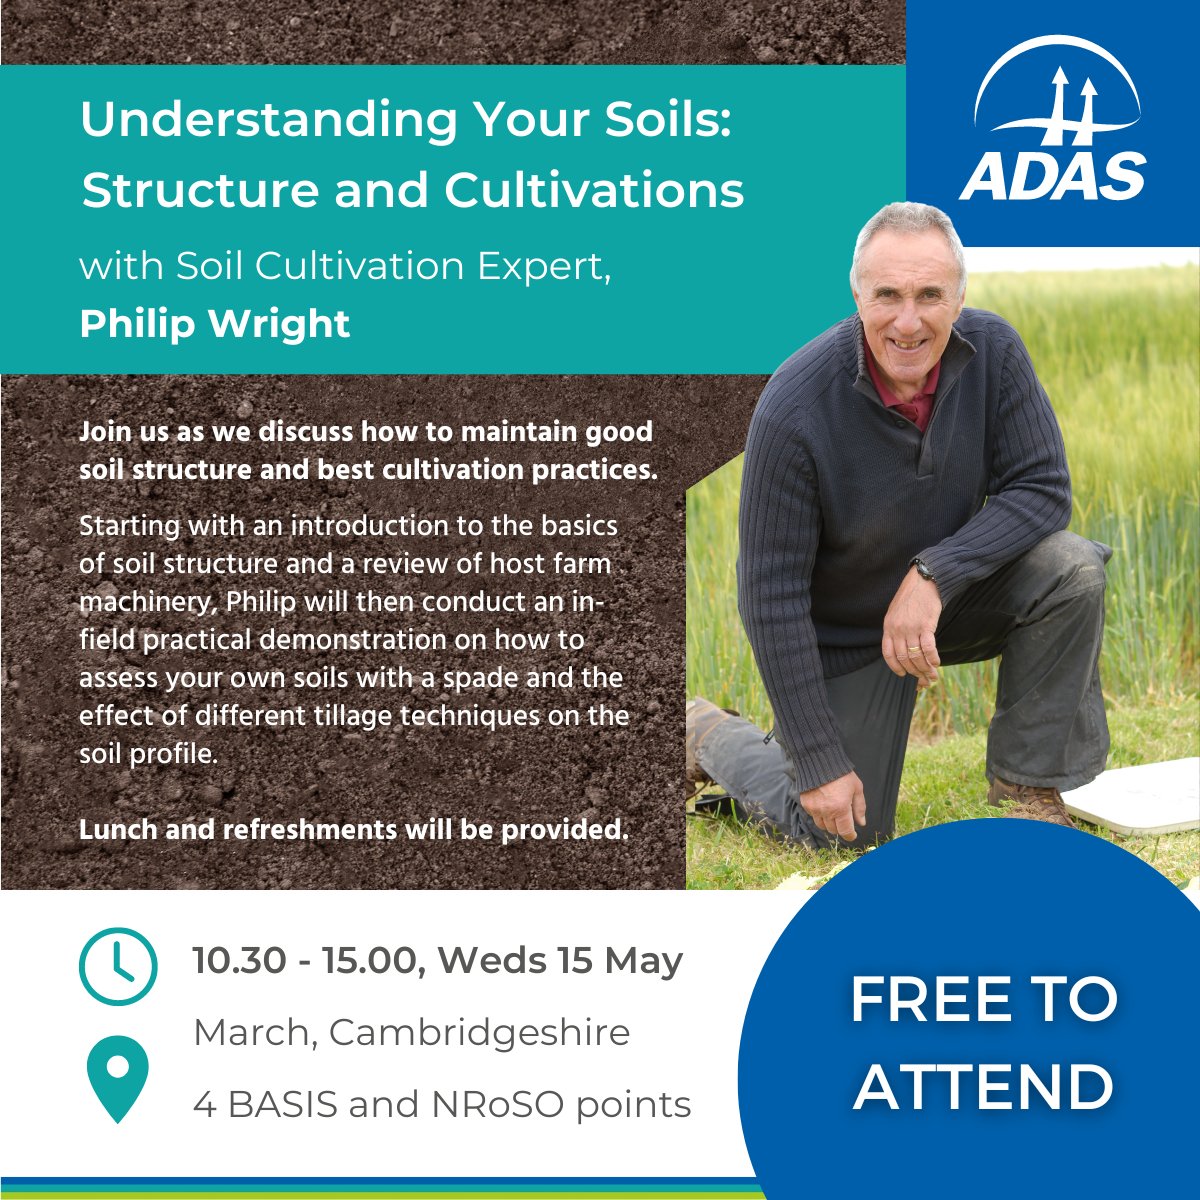 📅 Next Weds 15 May, we'll be in #March, #Cambridgeshire for a FREE #soil structure & cultivation farm event with Philip Wright 🚜 Includes machinery tour + 🍔 lunch + 4️⃣ @BASISRegLtd & NRoSO points Open to all farmers but booking essential 👇forms.office.com/pages/response…